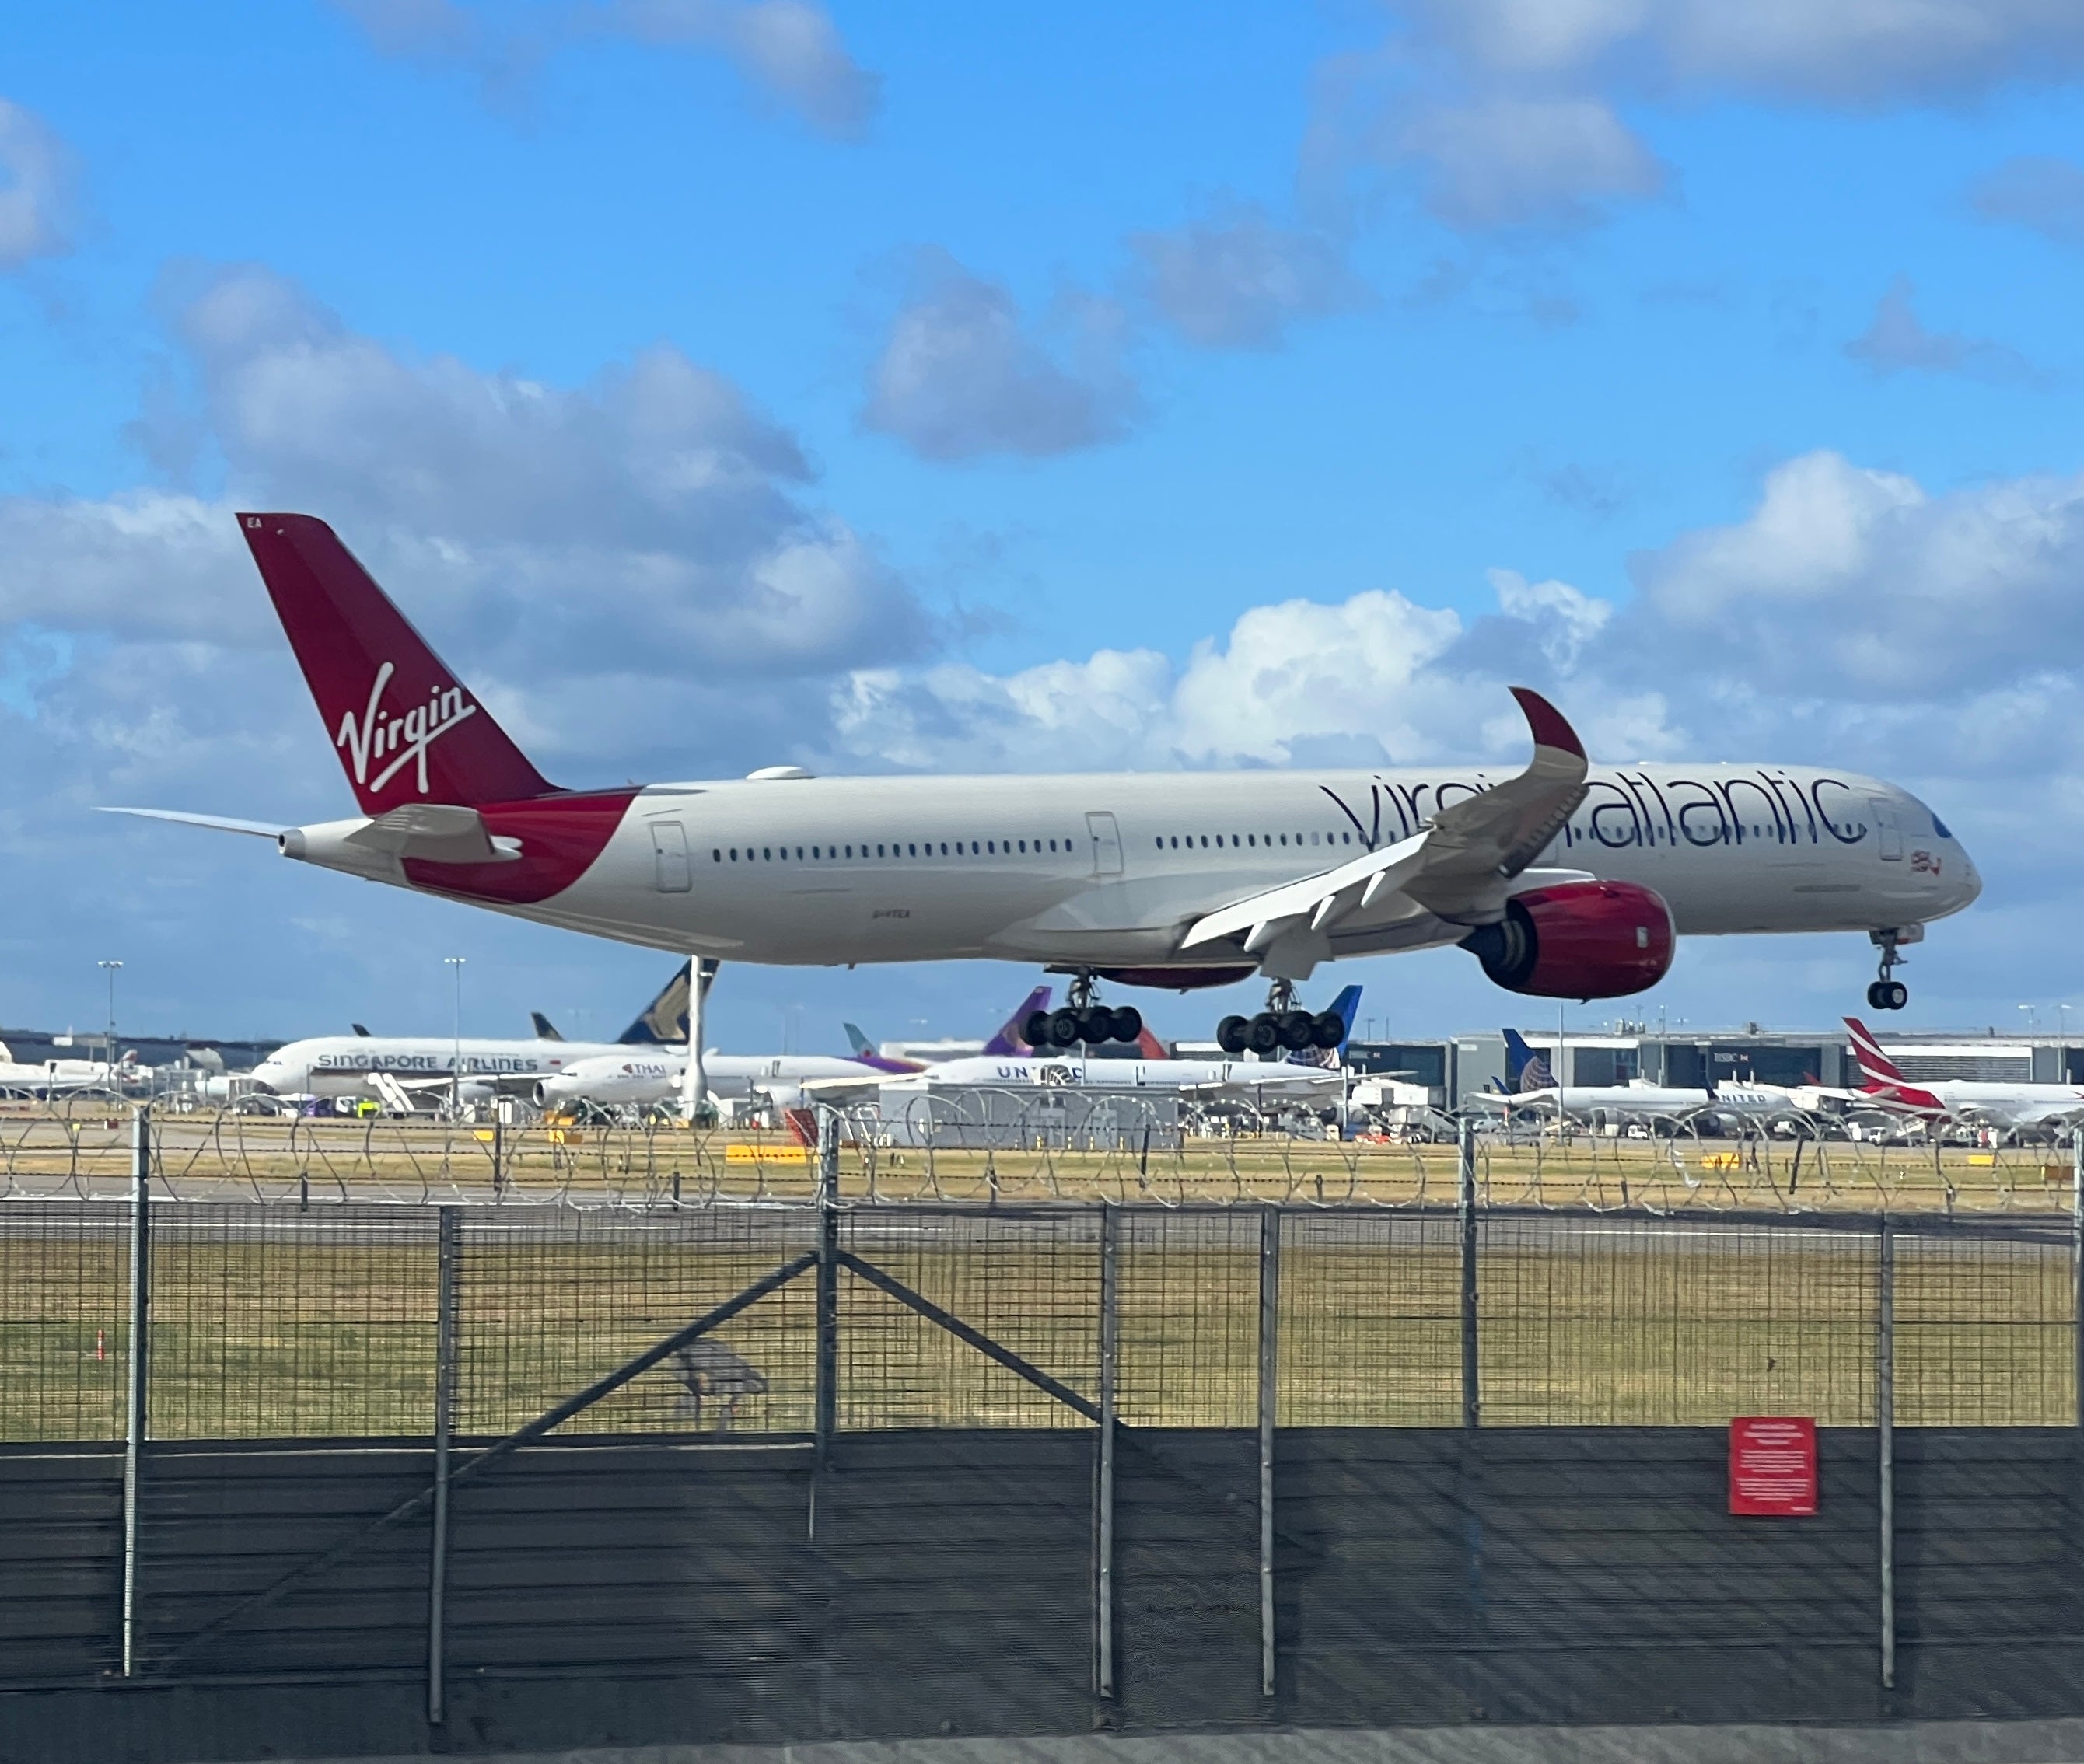 Virgin Atlantic was among the airlines affected